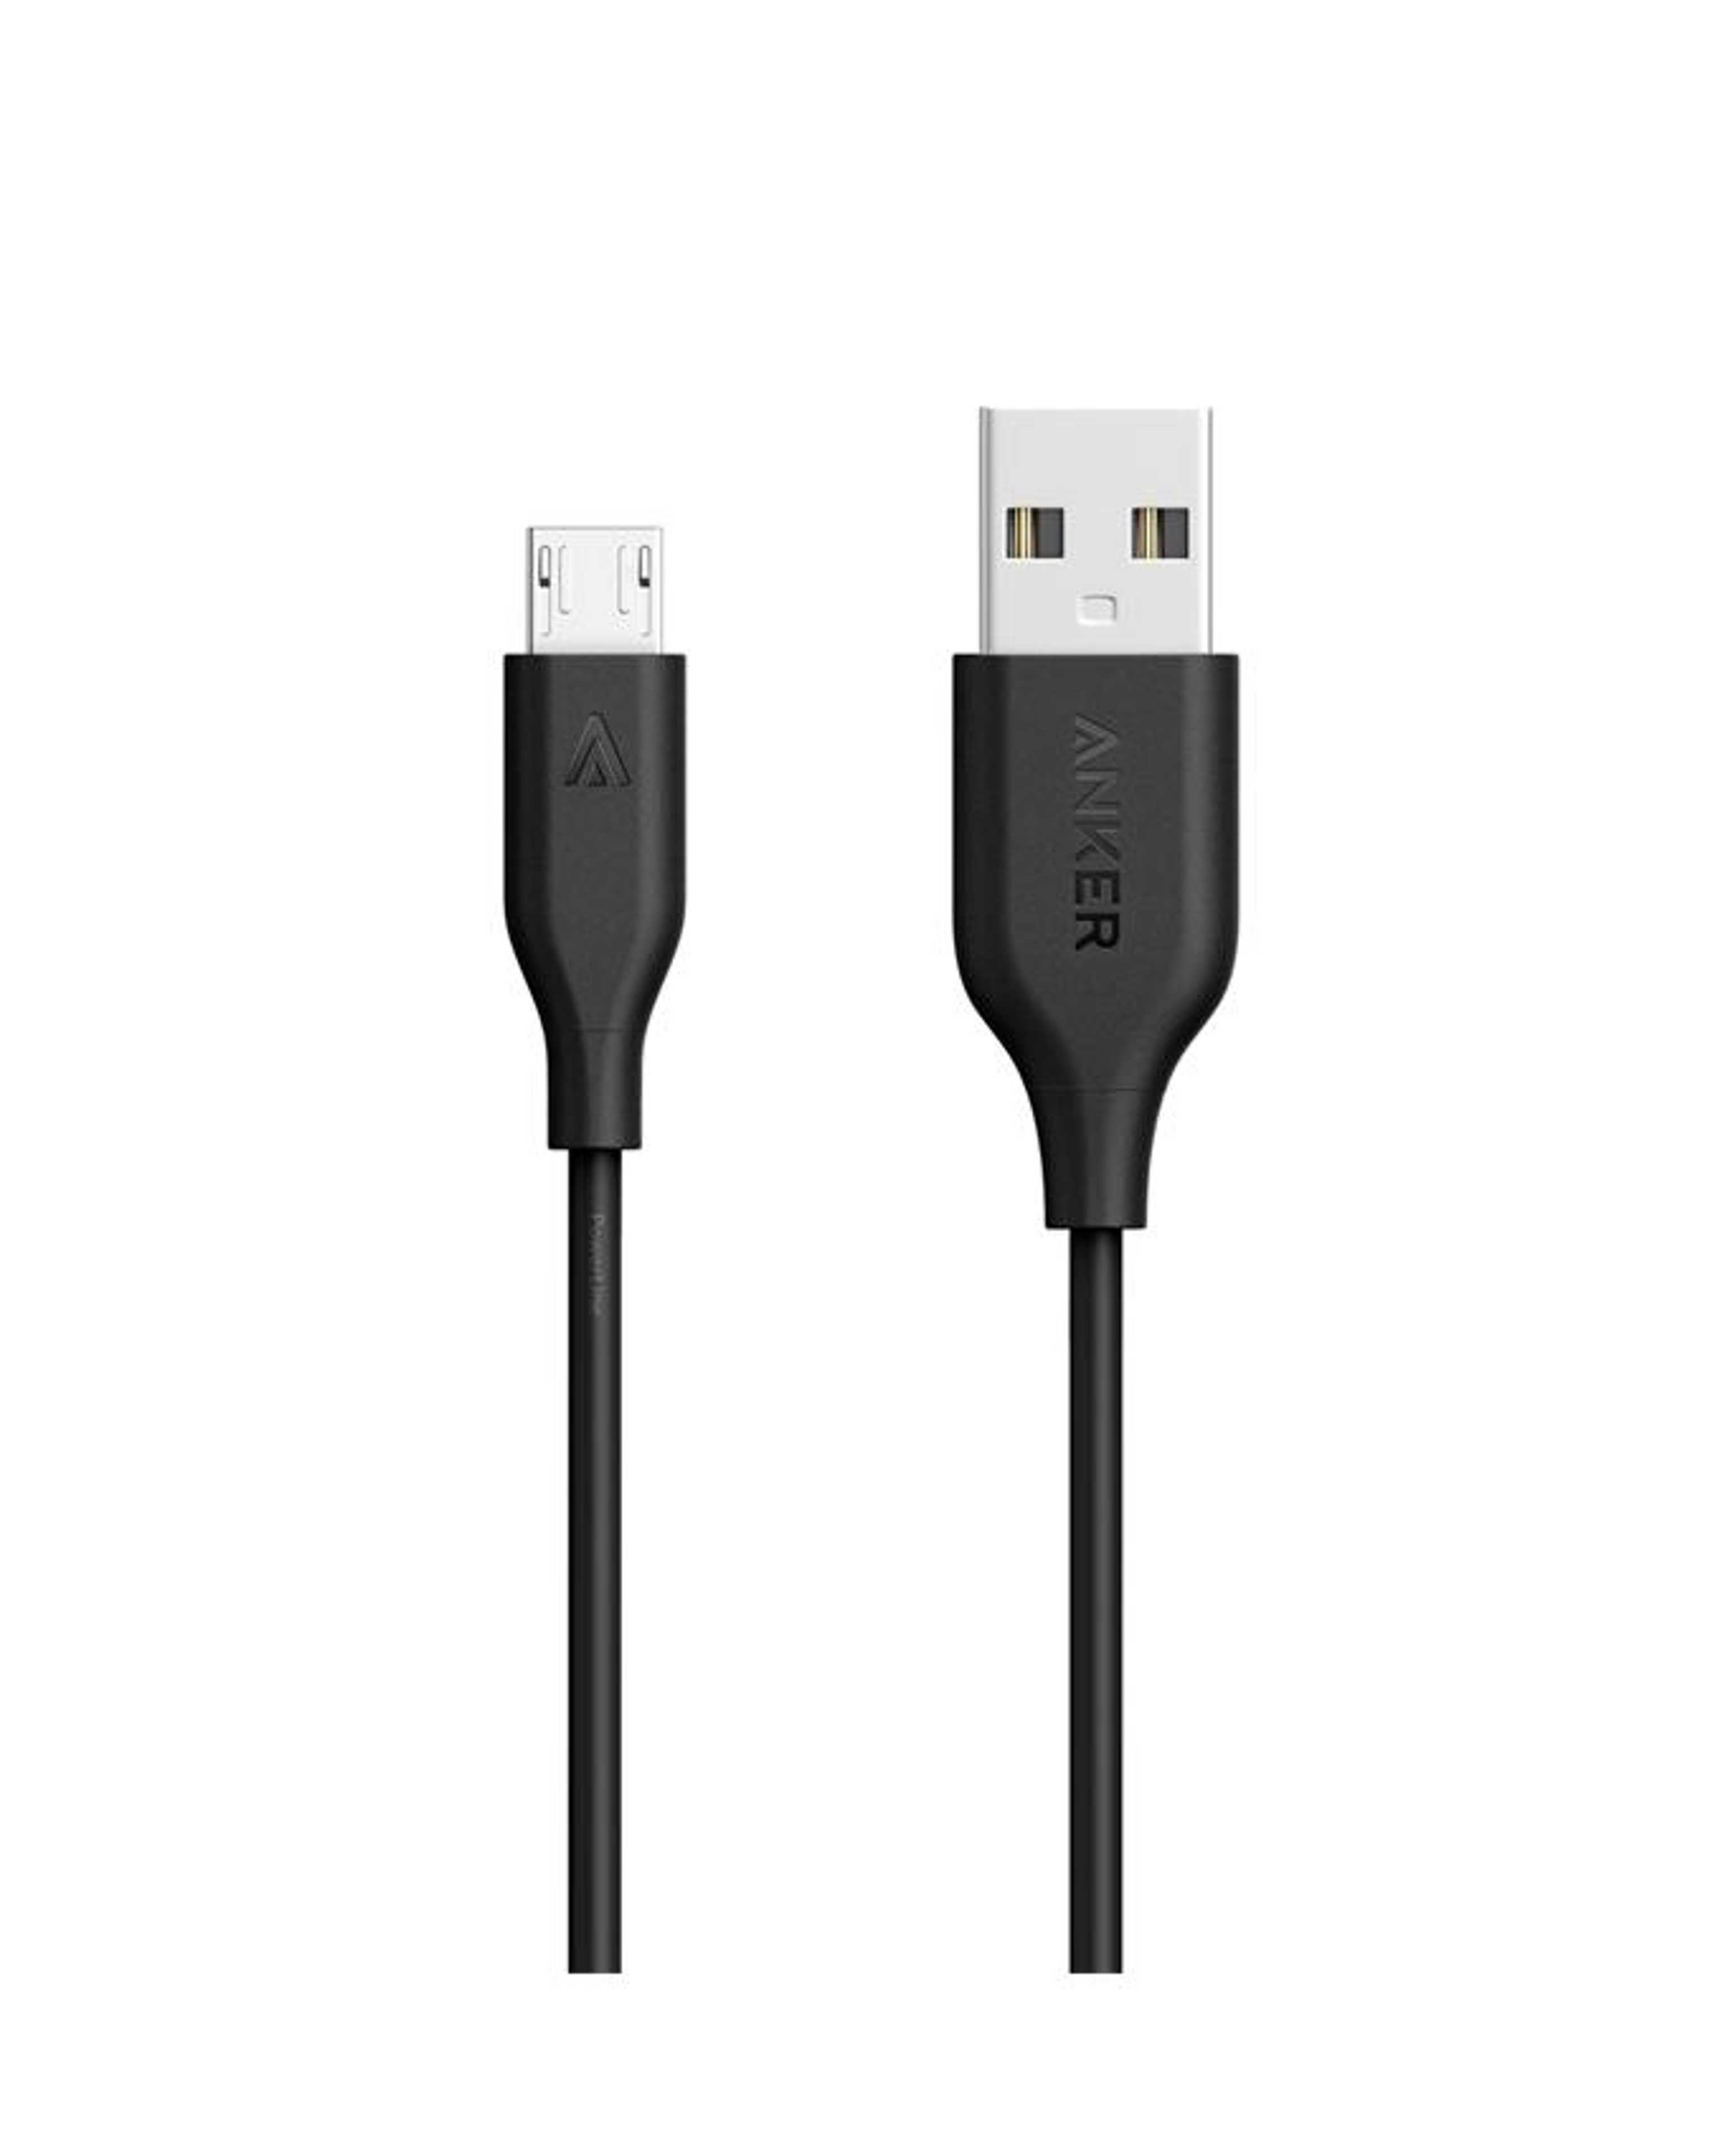 Anker PowerLine Micro USB Cable for Android - 3ft / 0.9 m - Black